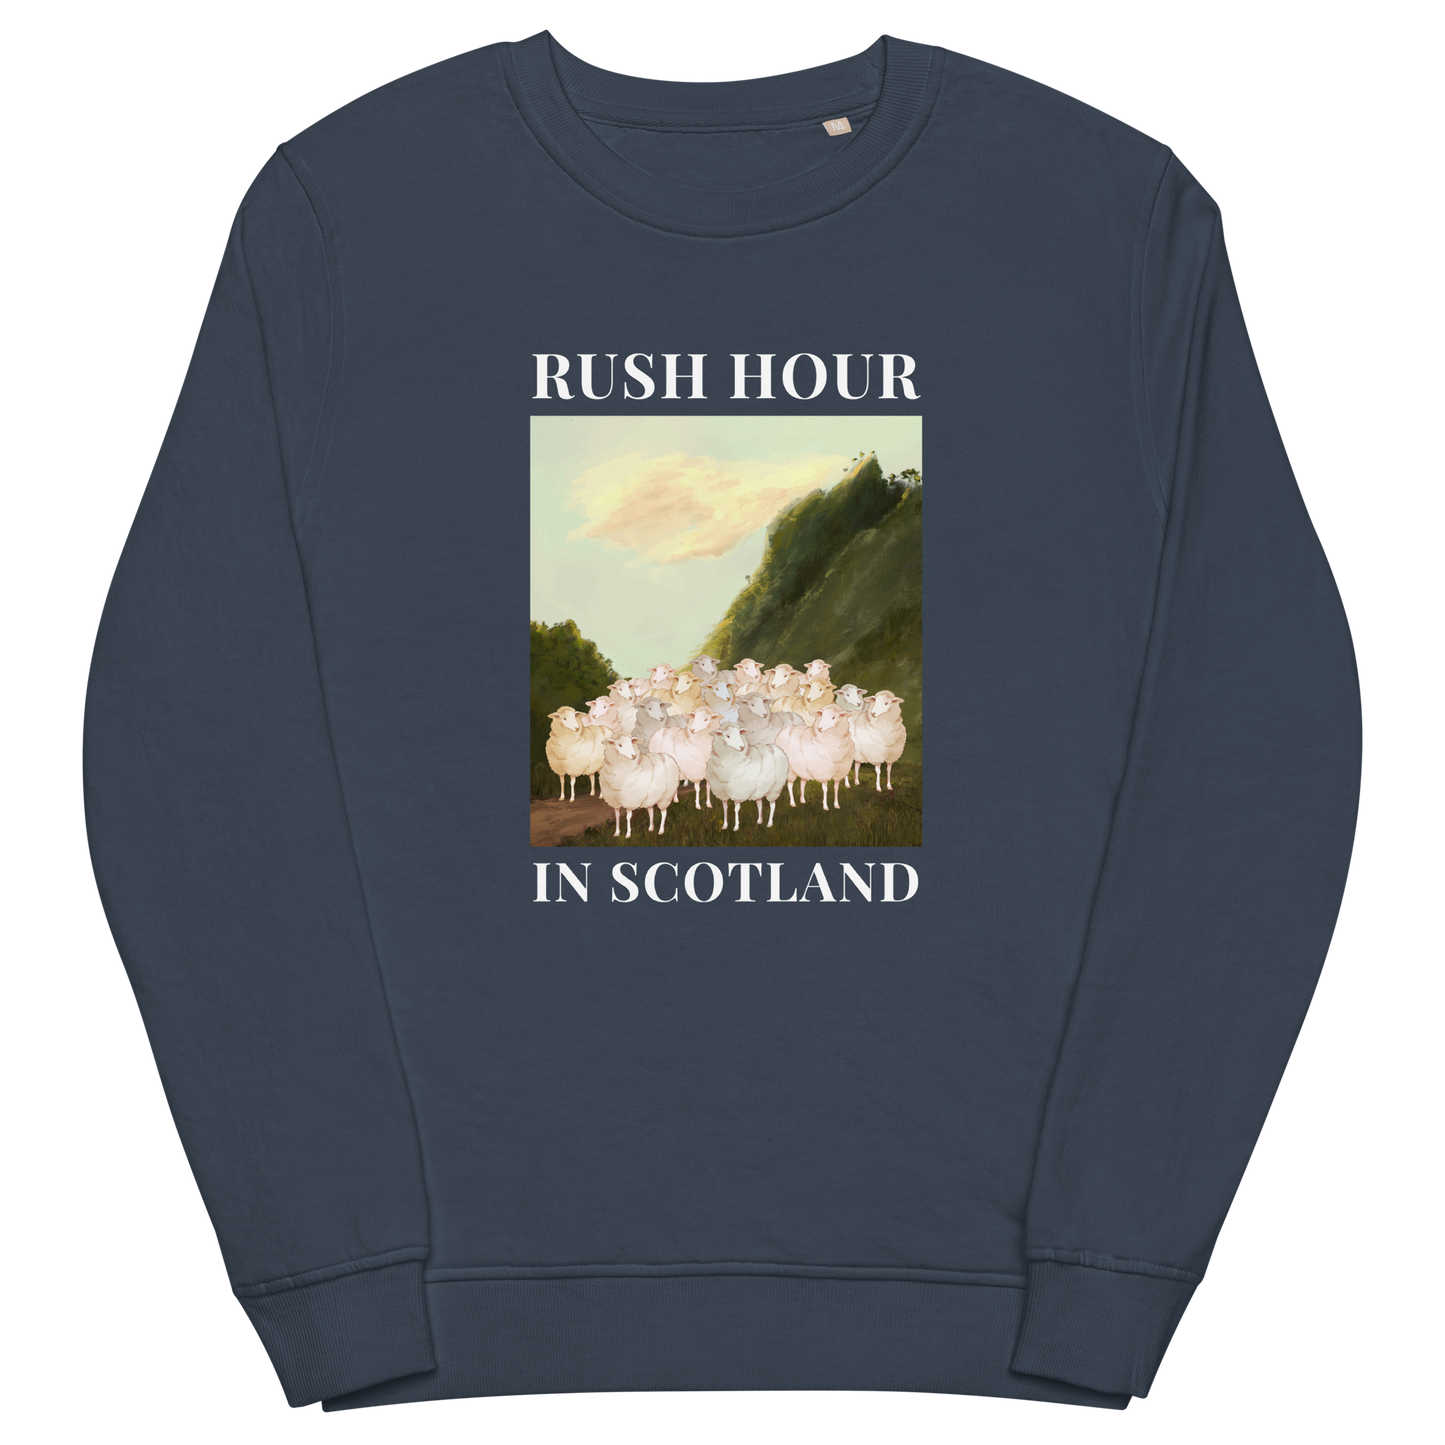 French Navy Sheep Organic Sweatshirt featuring a comical Rush Hour In Scotland graphic on the chest - Artsy & Funny Graphic Sheep Sweatshirts - Boozy Fox